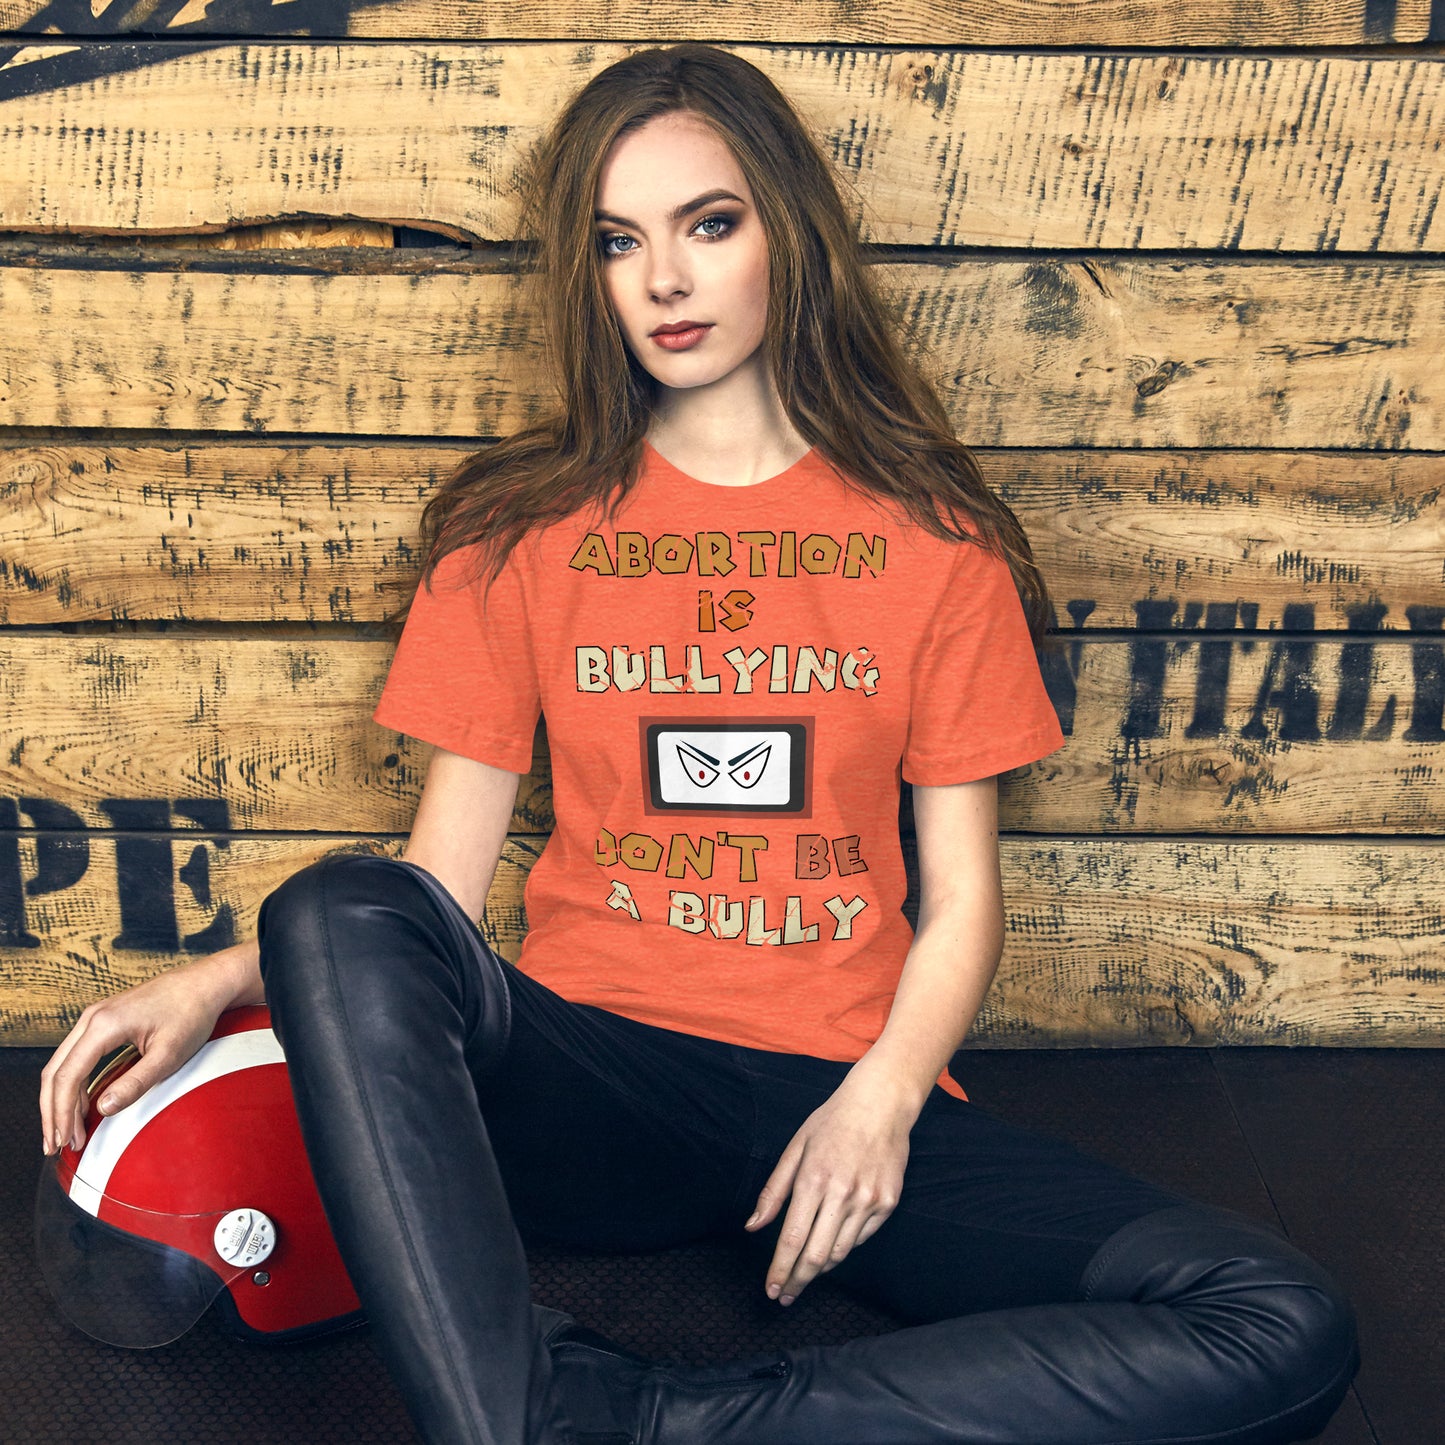 A001 T-shirt - Bella + Canvas 3001 Unisex T-shirt Featuring Sinister Eyes Graphic with text “Abortion is Bullying. Don’t be a Bully.”